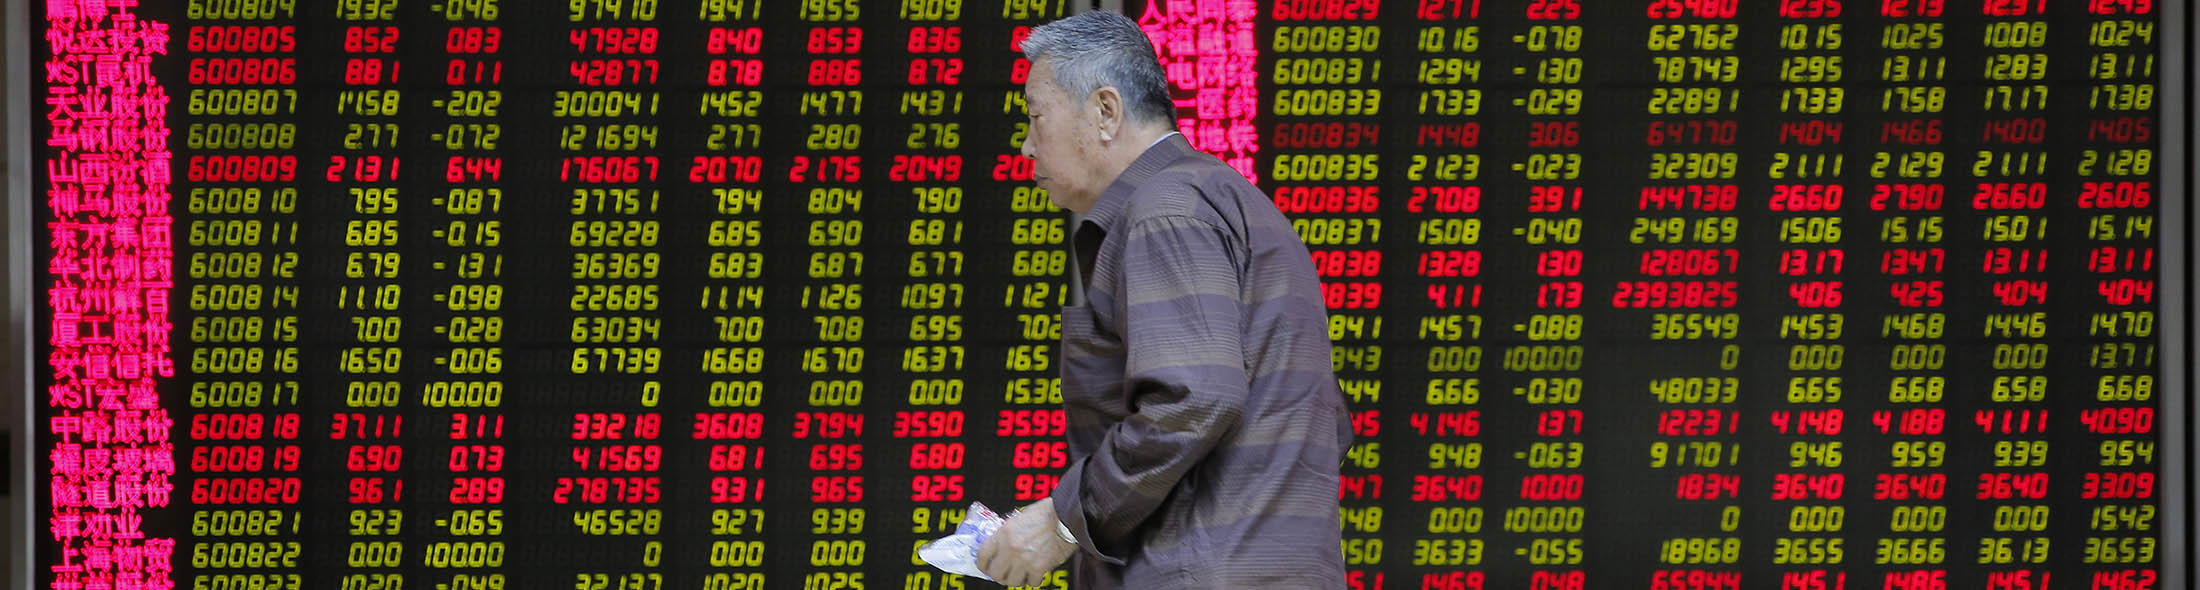 A Chinese investor walks past large screens displaying share prices at a securities brokerage house in Beijing, China.
